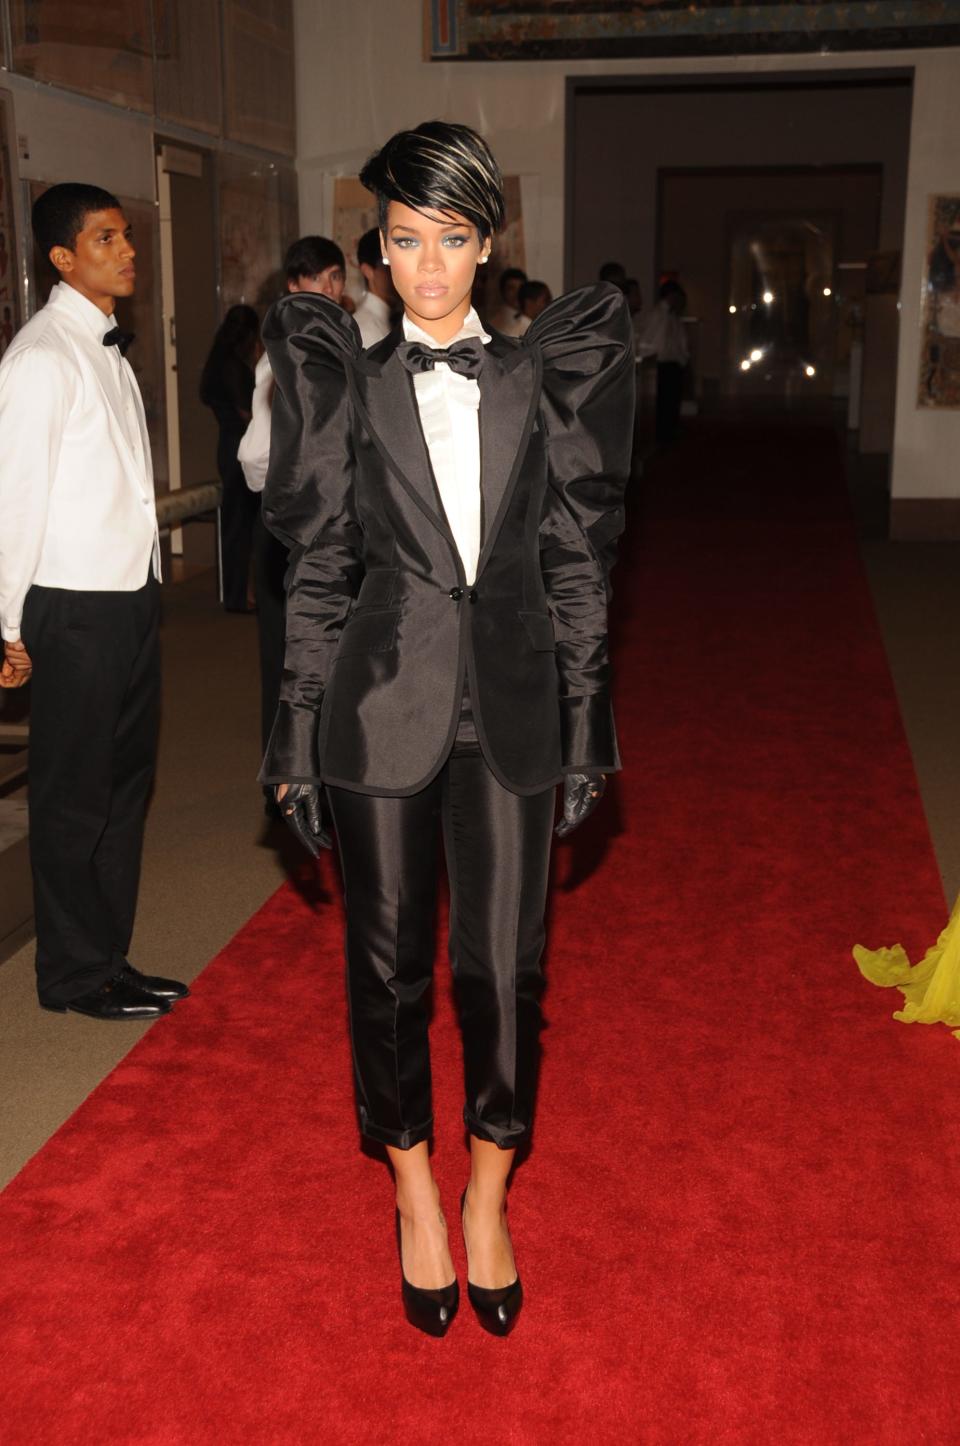 Rihanna at the 2009 Met Gala wearing a black tuxedo with cropped pants and butterfly shoulders.